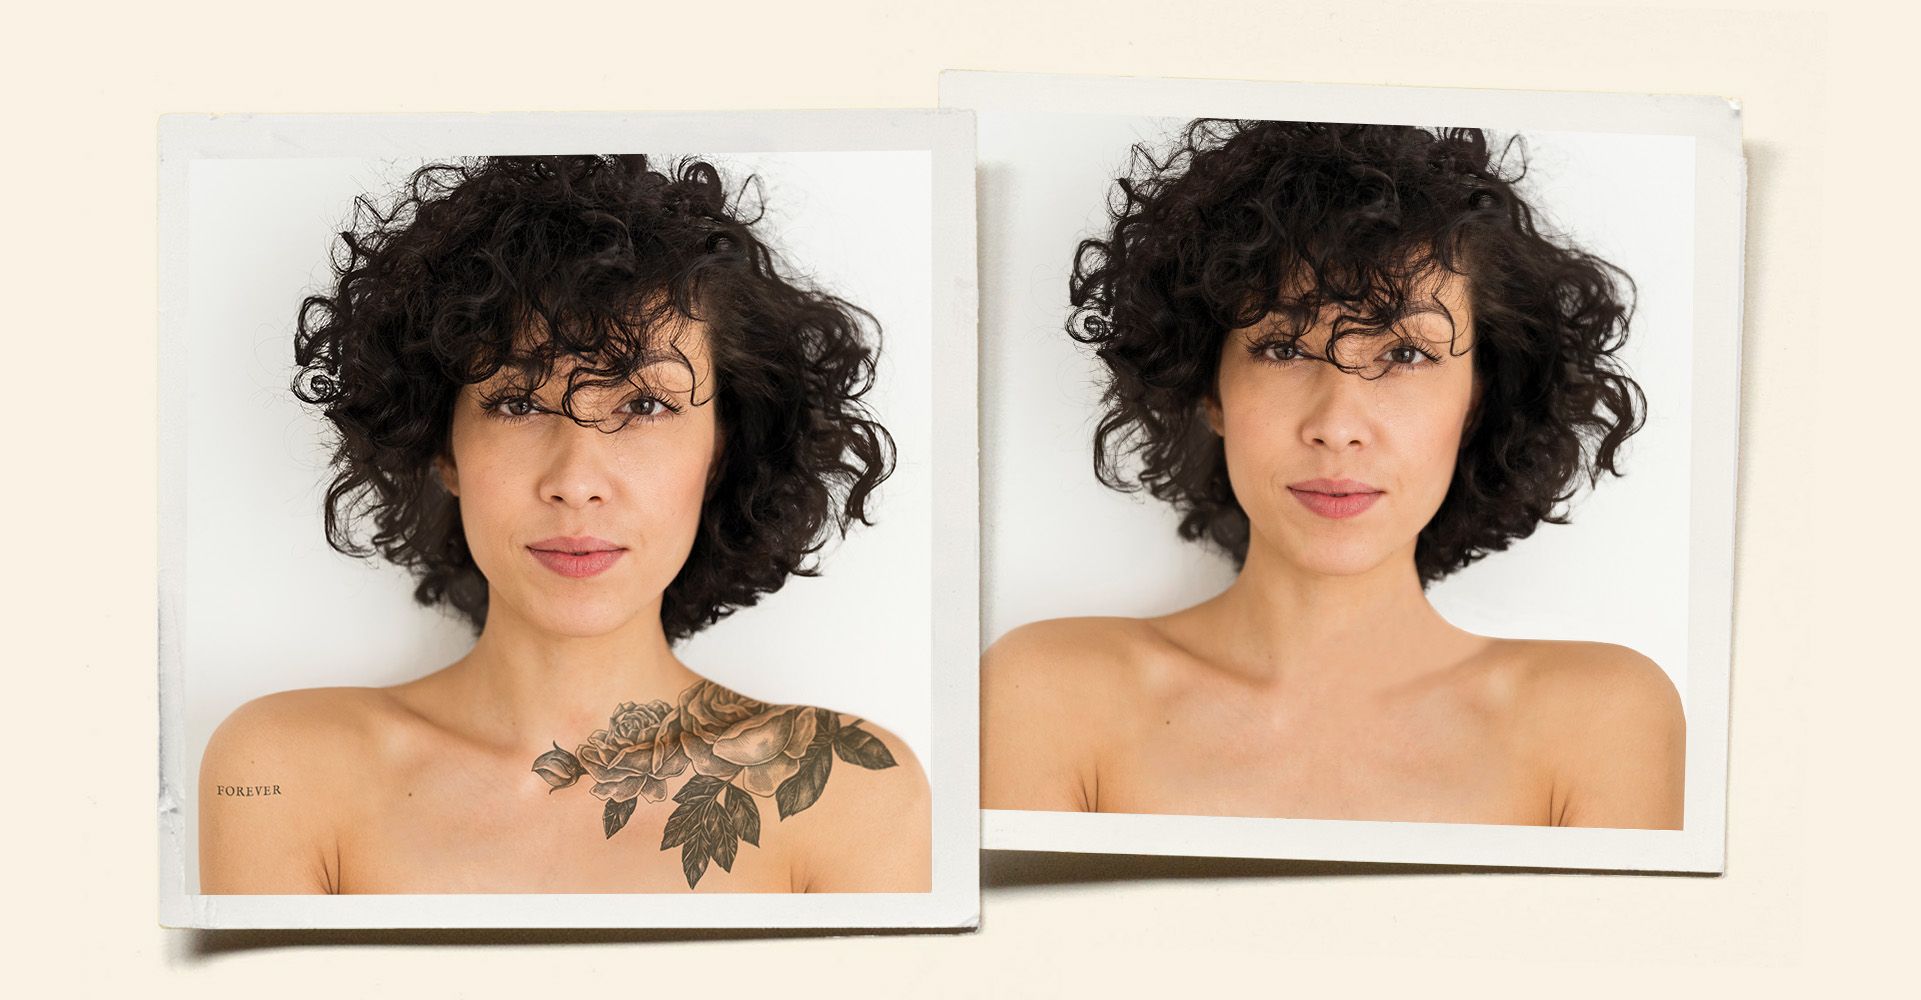 kas ochtendgloren Netto Makeup That Covers Up Tattoos - 7 Product Recommendations From Tattoo  Experts